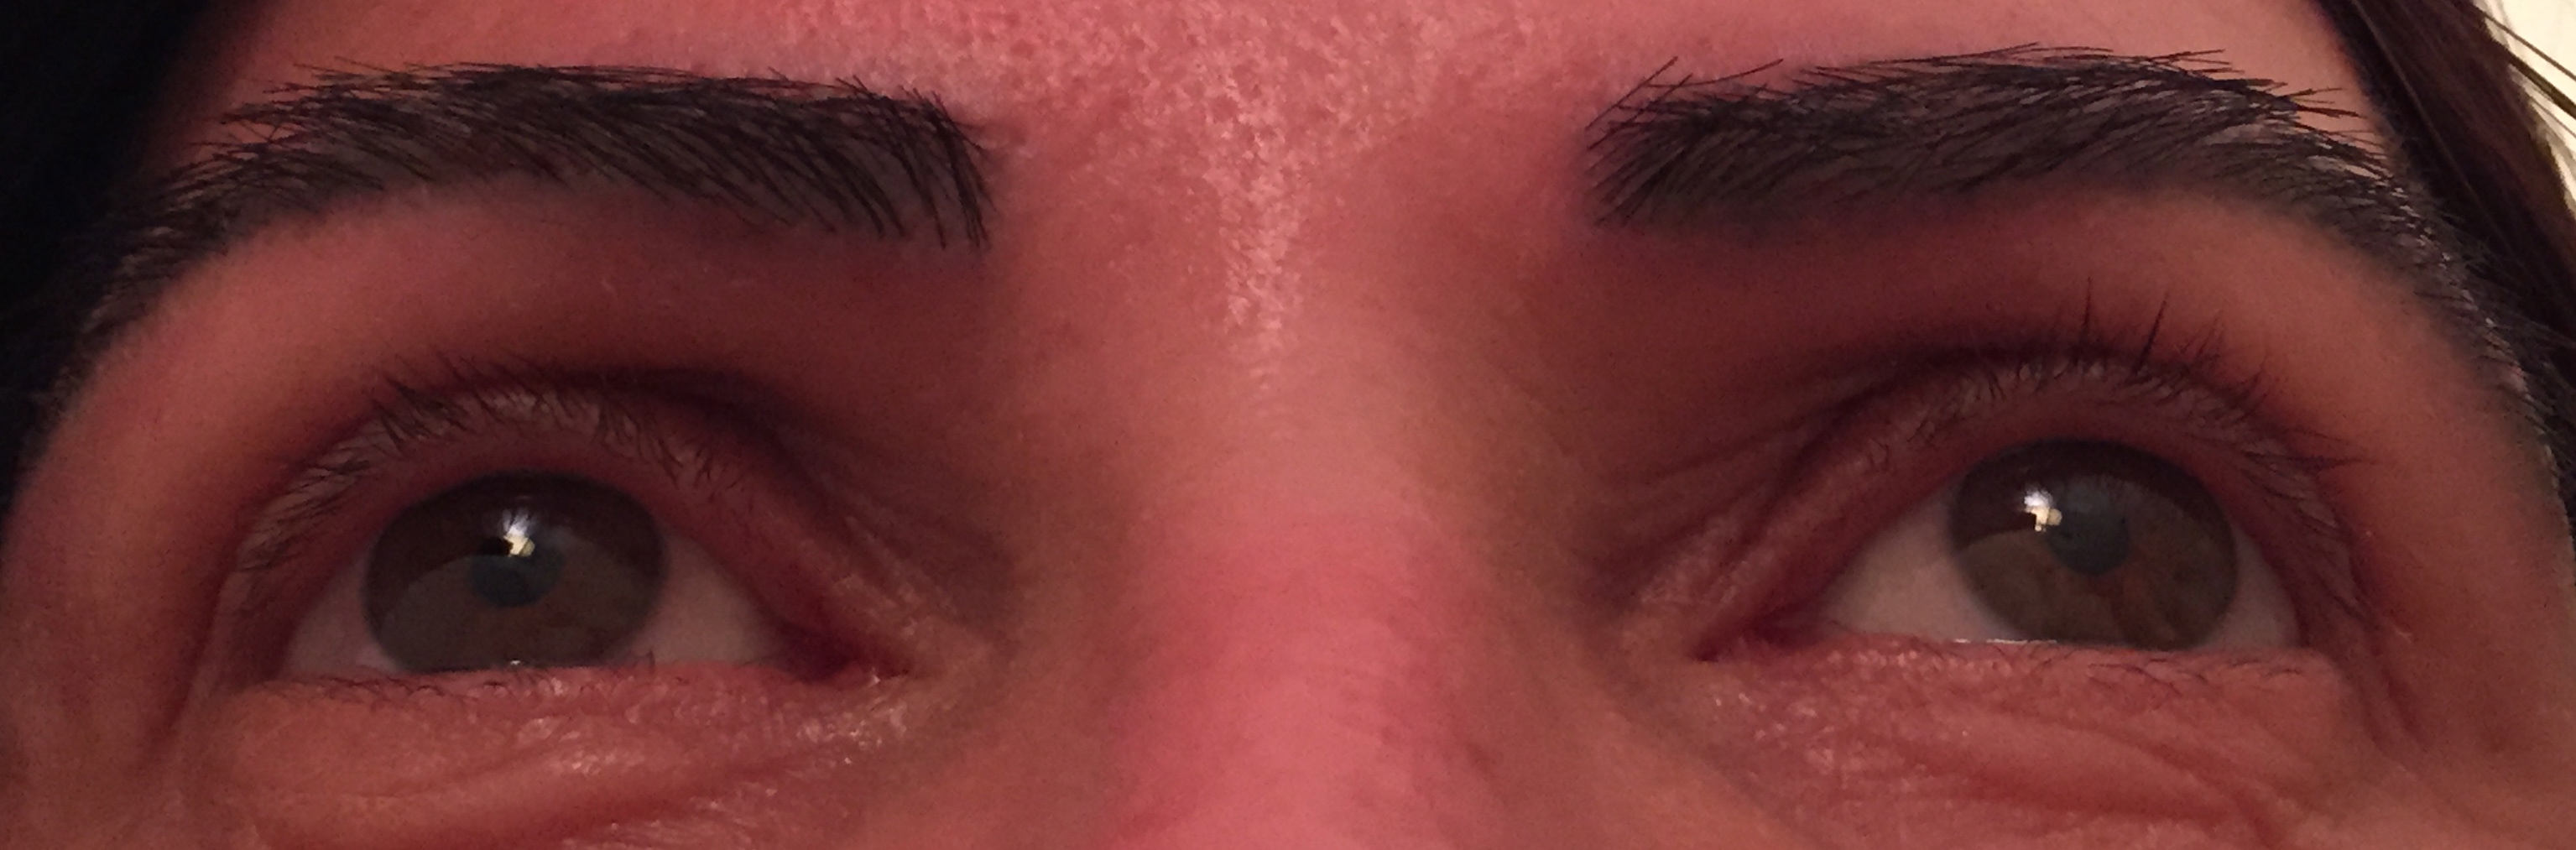 This is one week after approximately 300 grafts were placed in each eyebrow to correct a botched eyebrow transplant procedure.